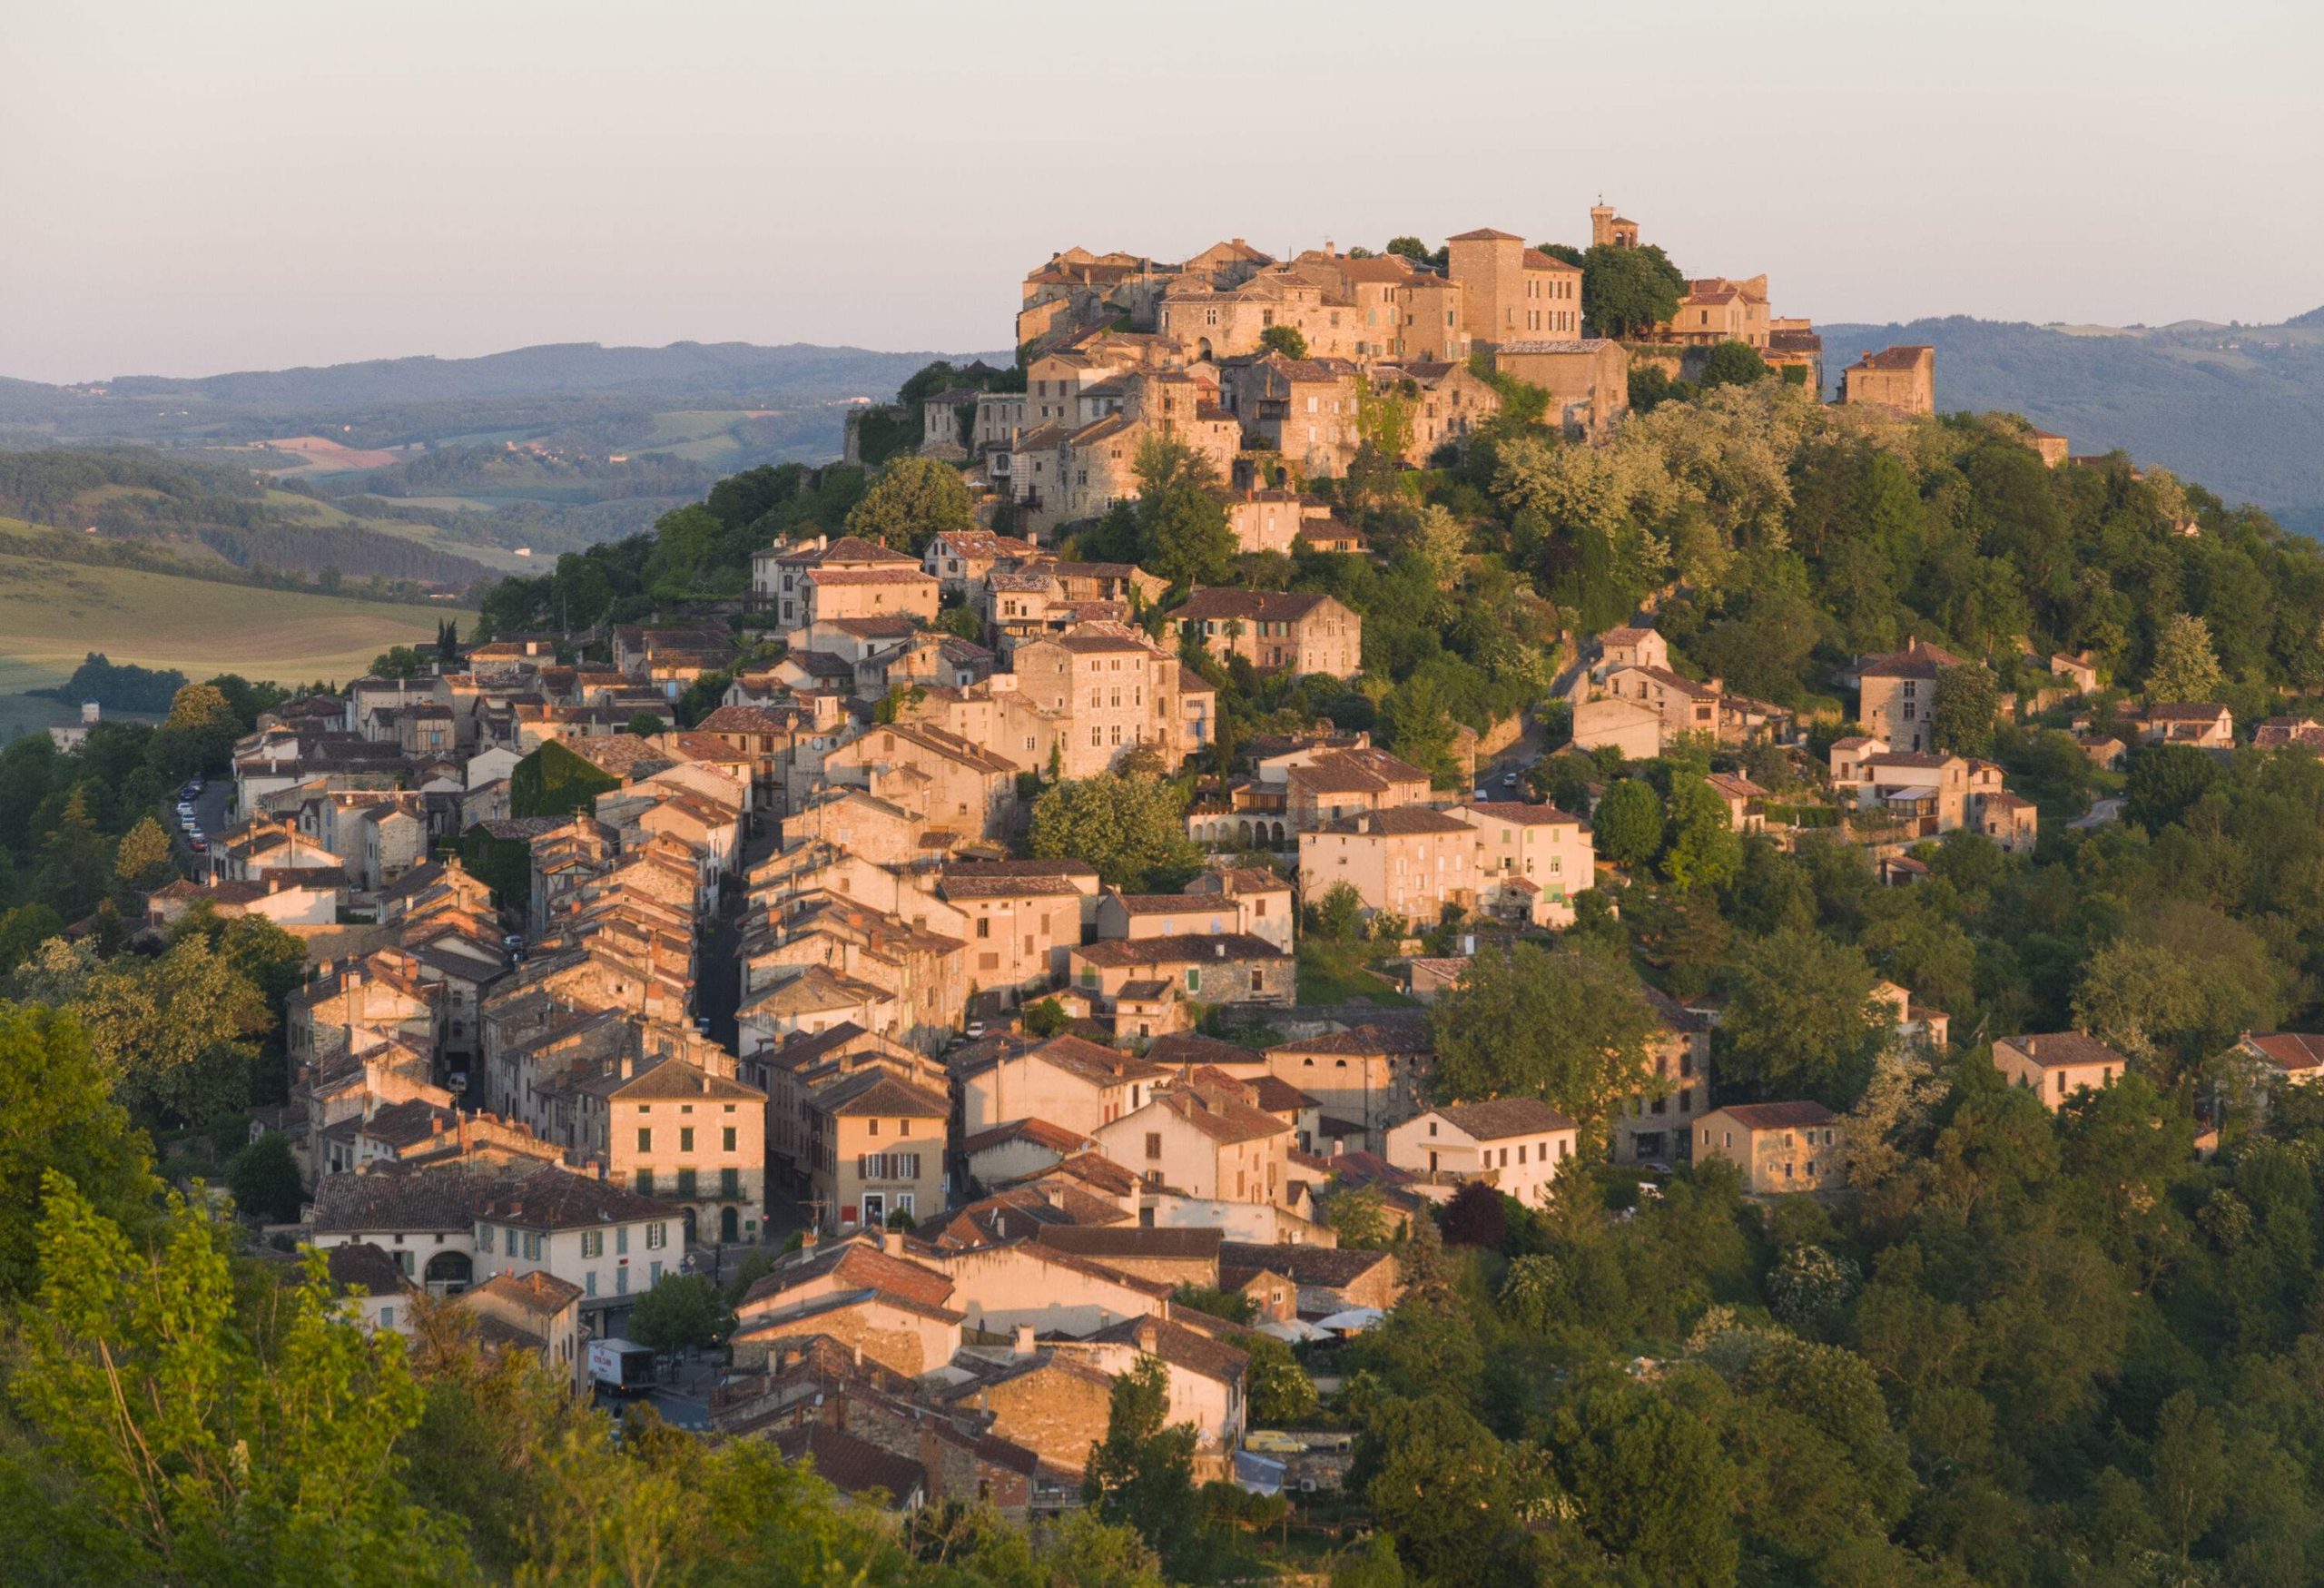 An old medieval town with classic stone buildings perched on a lush hilltop at sunrise.